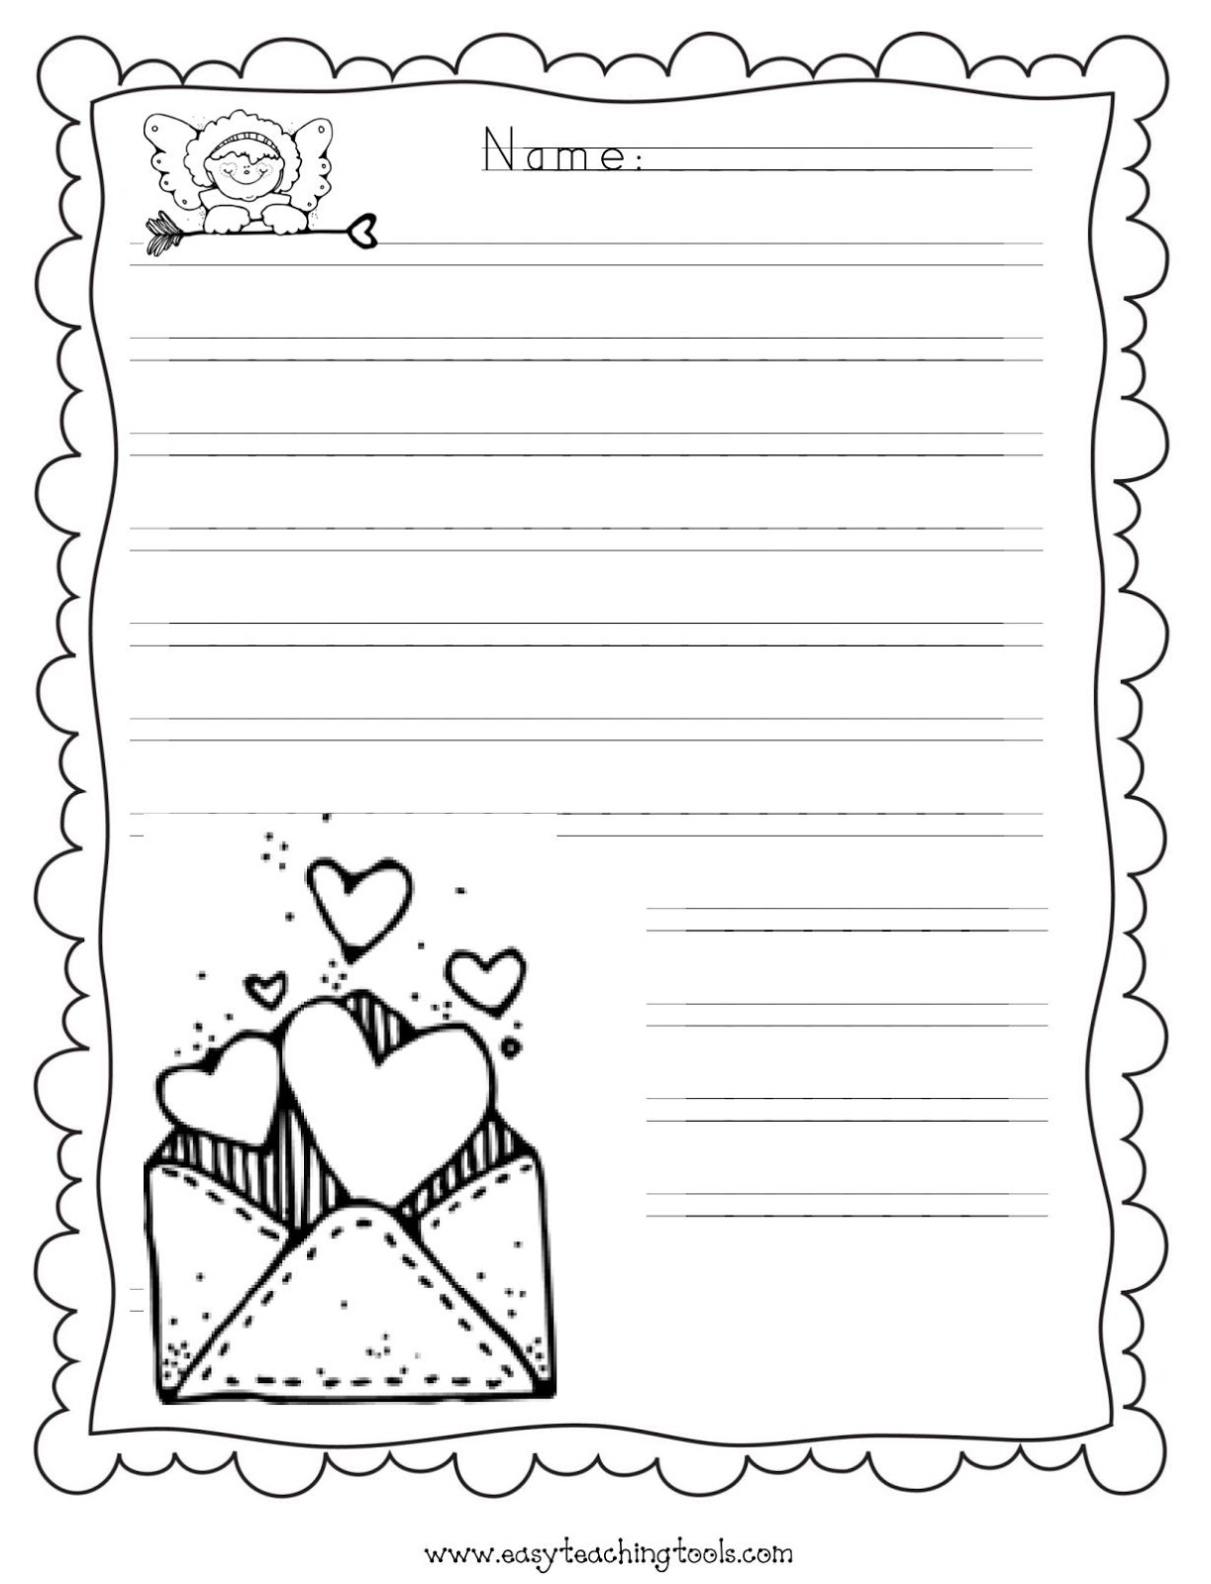 Handwriting Without Tears - Easy Teaching Tools In Handwriting Without Tears Letter Templates